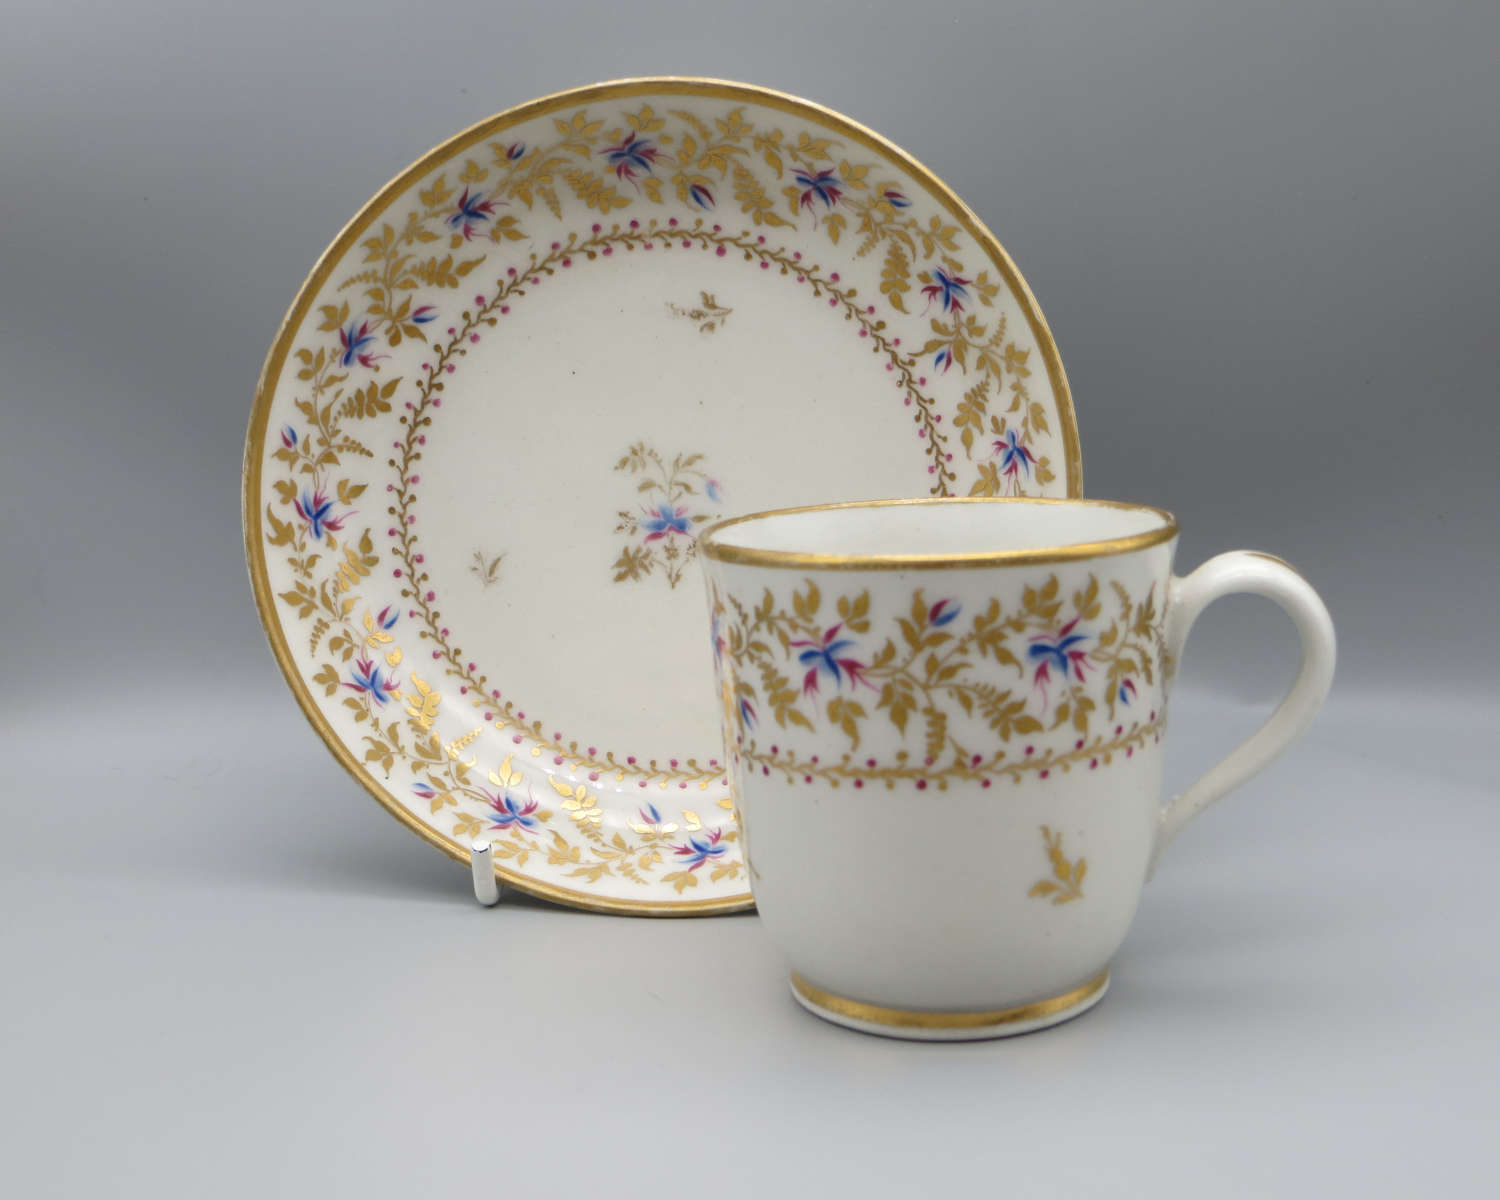 18th century New Hall coffee cup and saucer